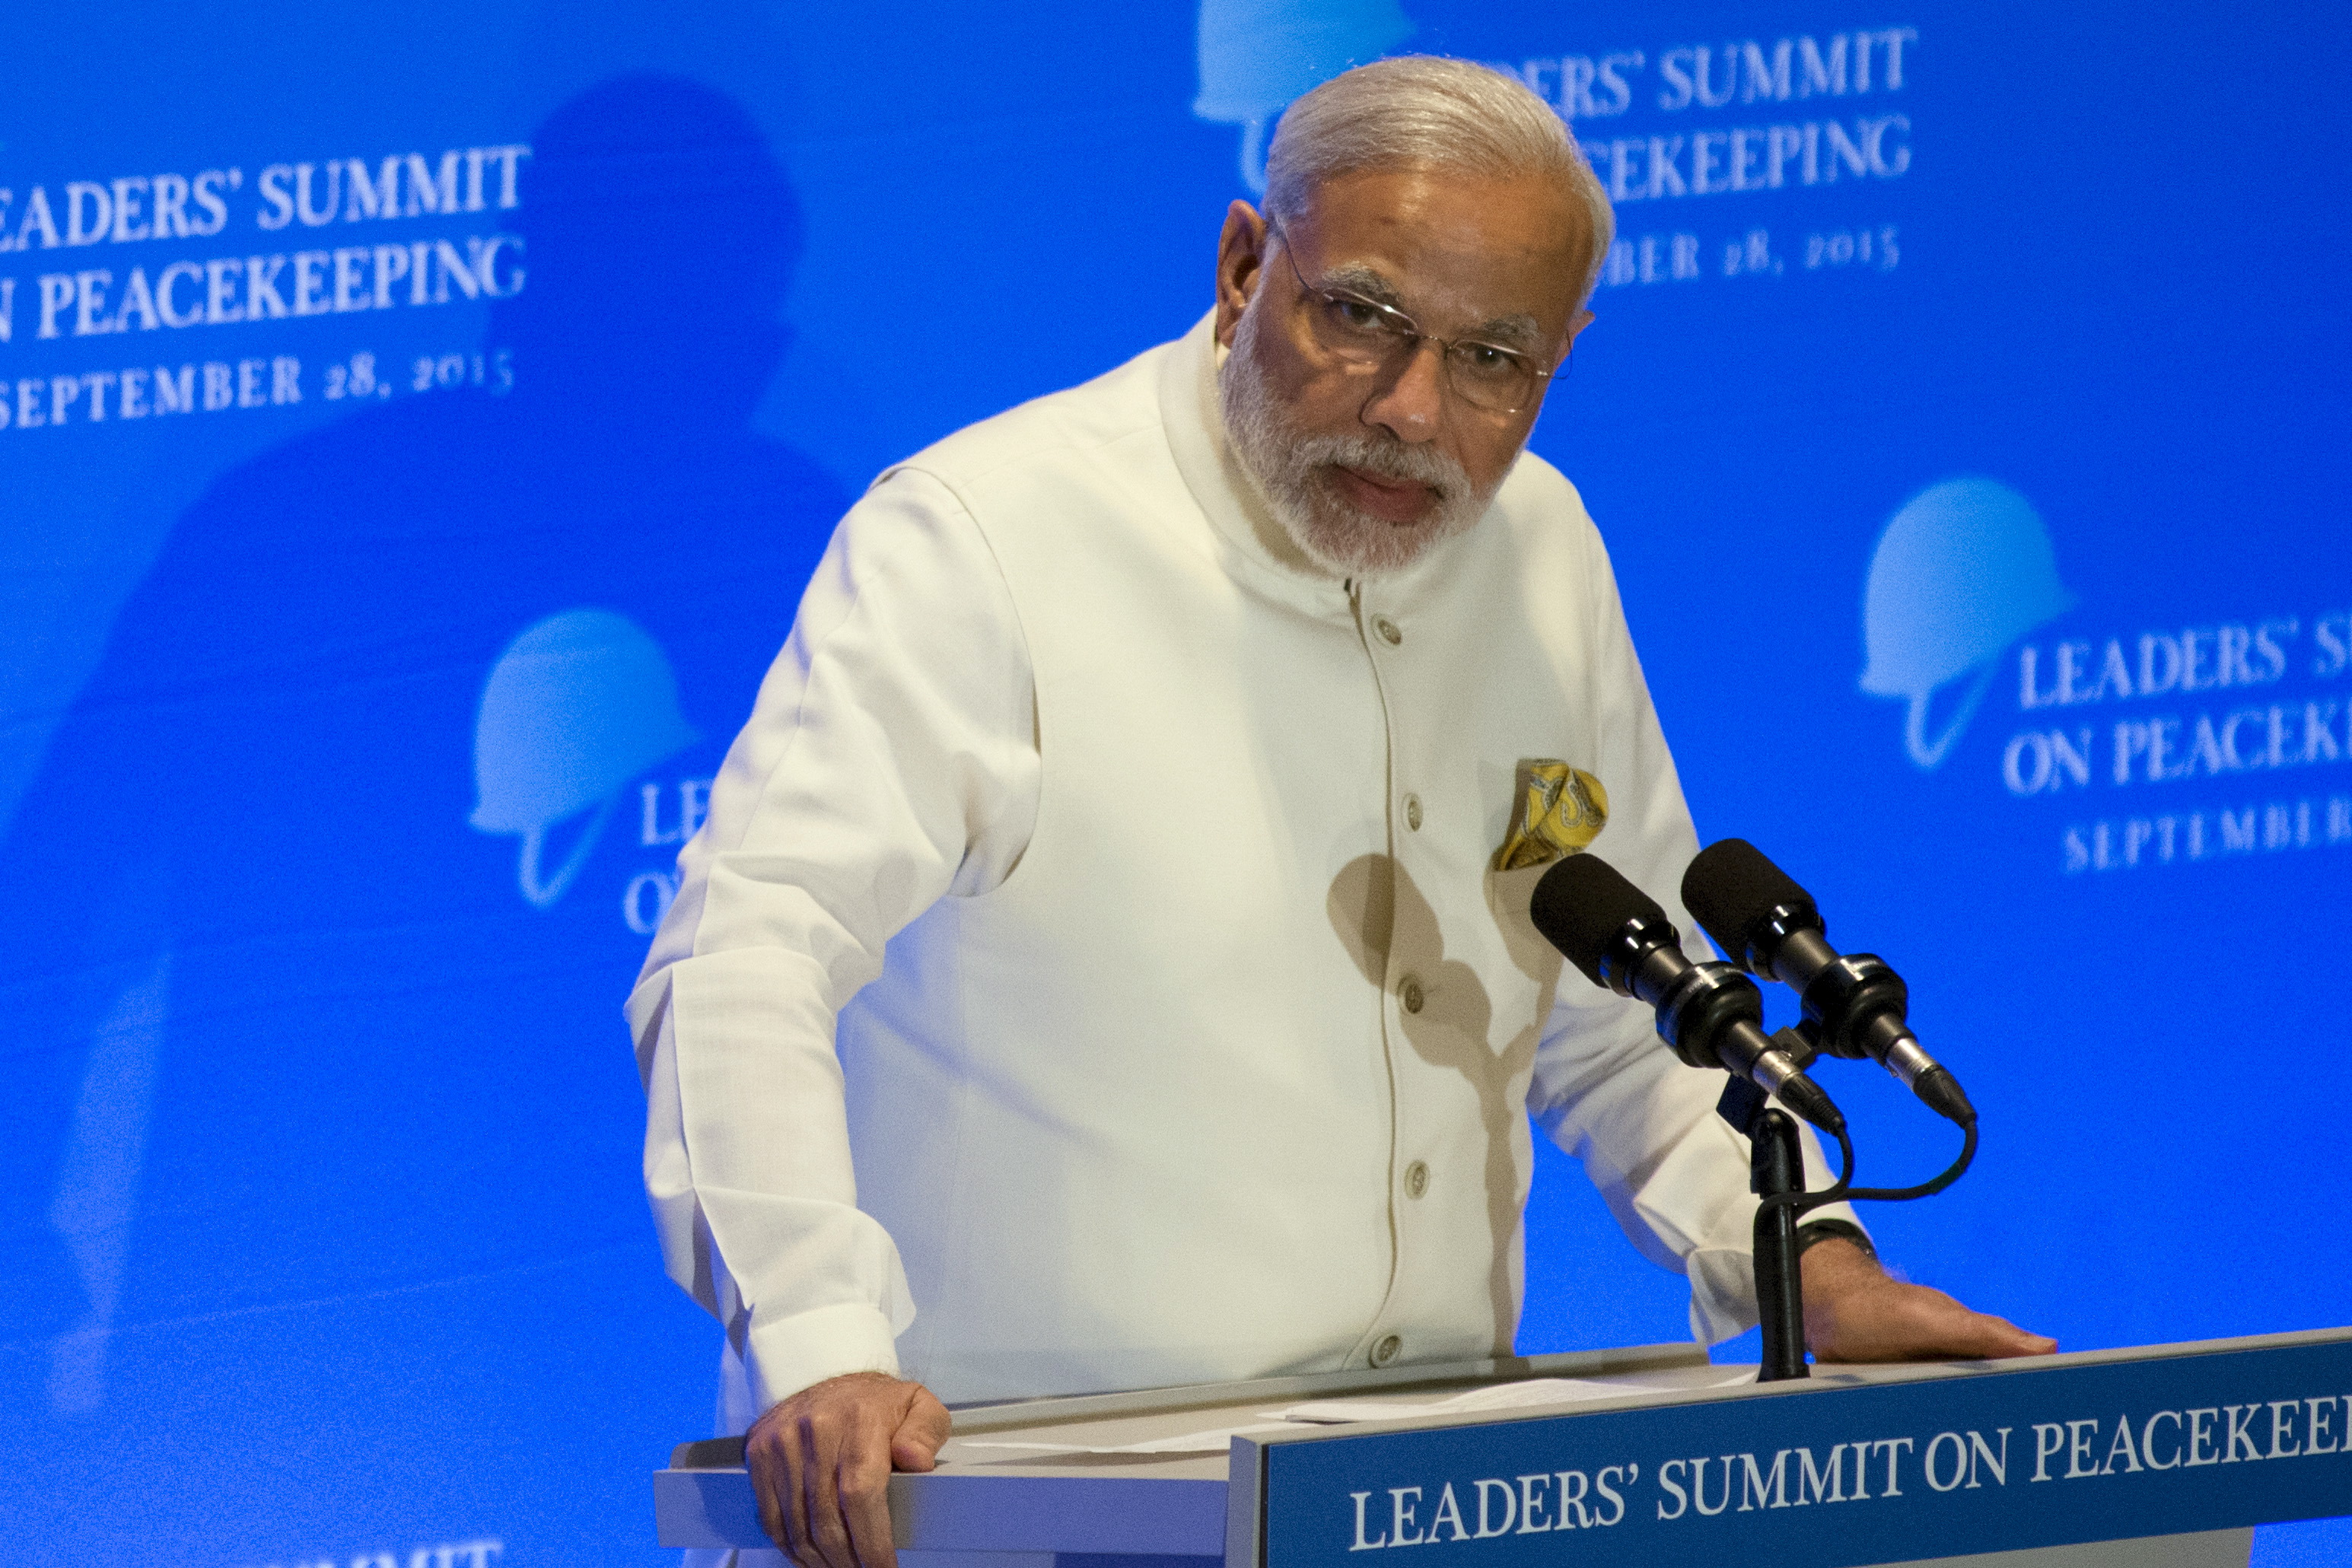 India's Prime Minister Narendra Modi delivers remarks during a Leaders' Summit on Peacekeeping to coincide with the U.N. General Assembly at the U.N. in New York City on Sept. 28, 2015 (Andrew Kelly—Reuters)